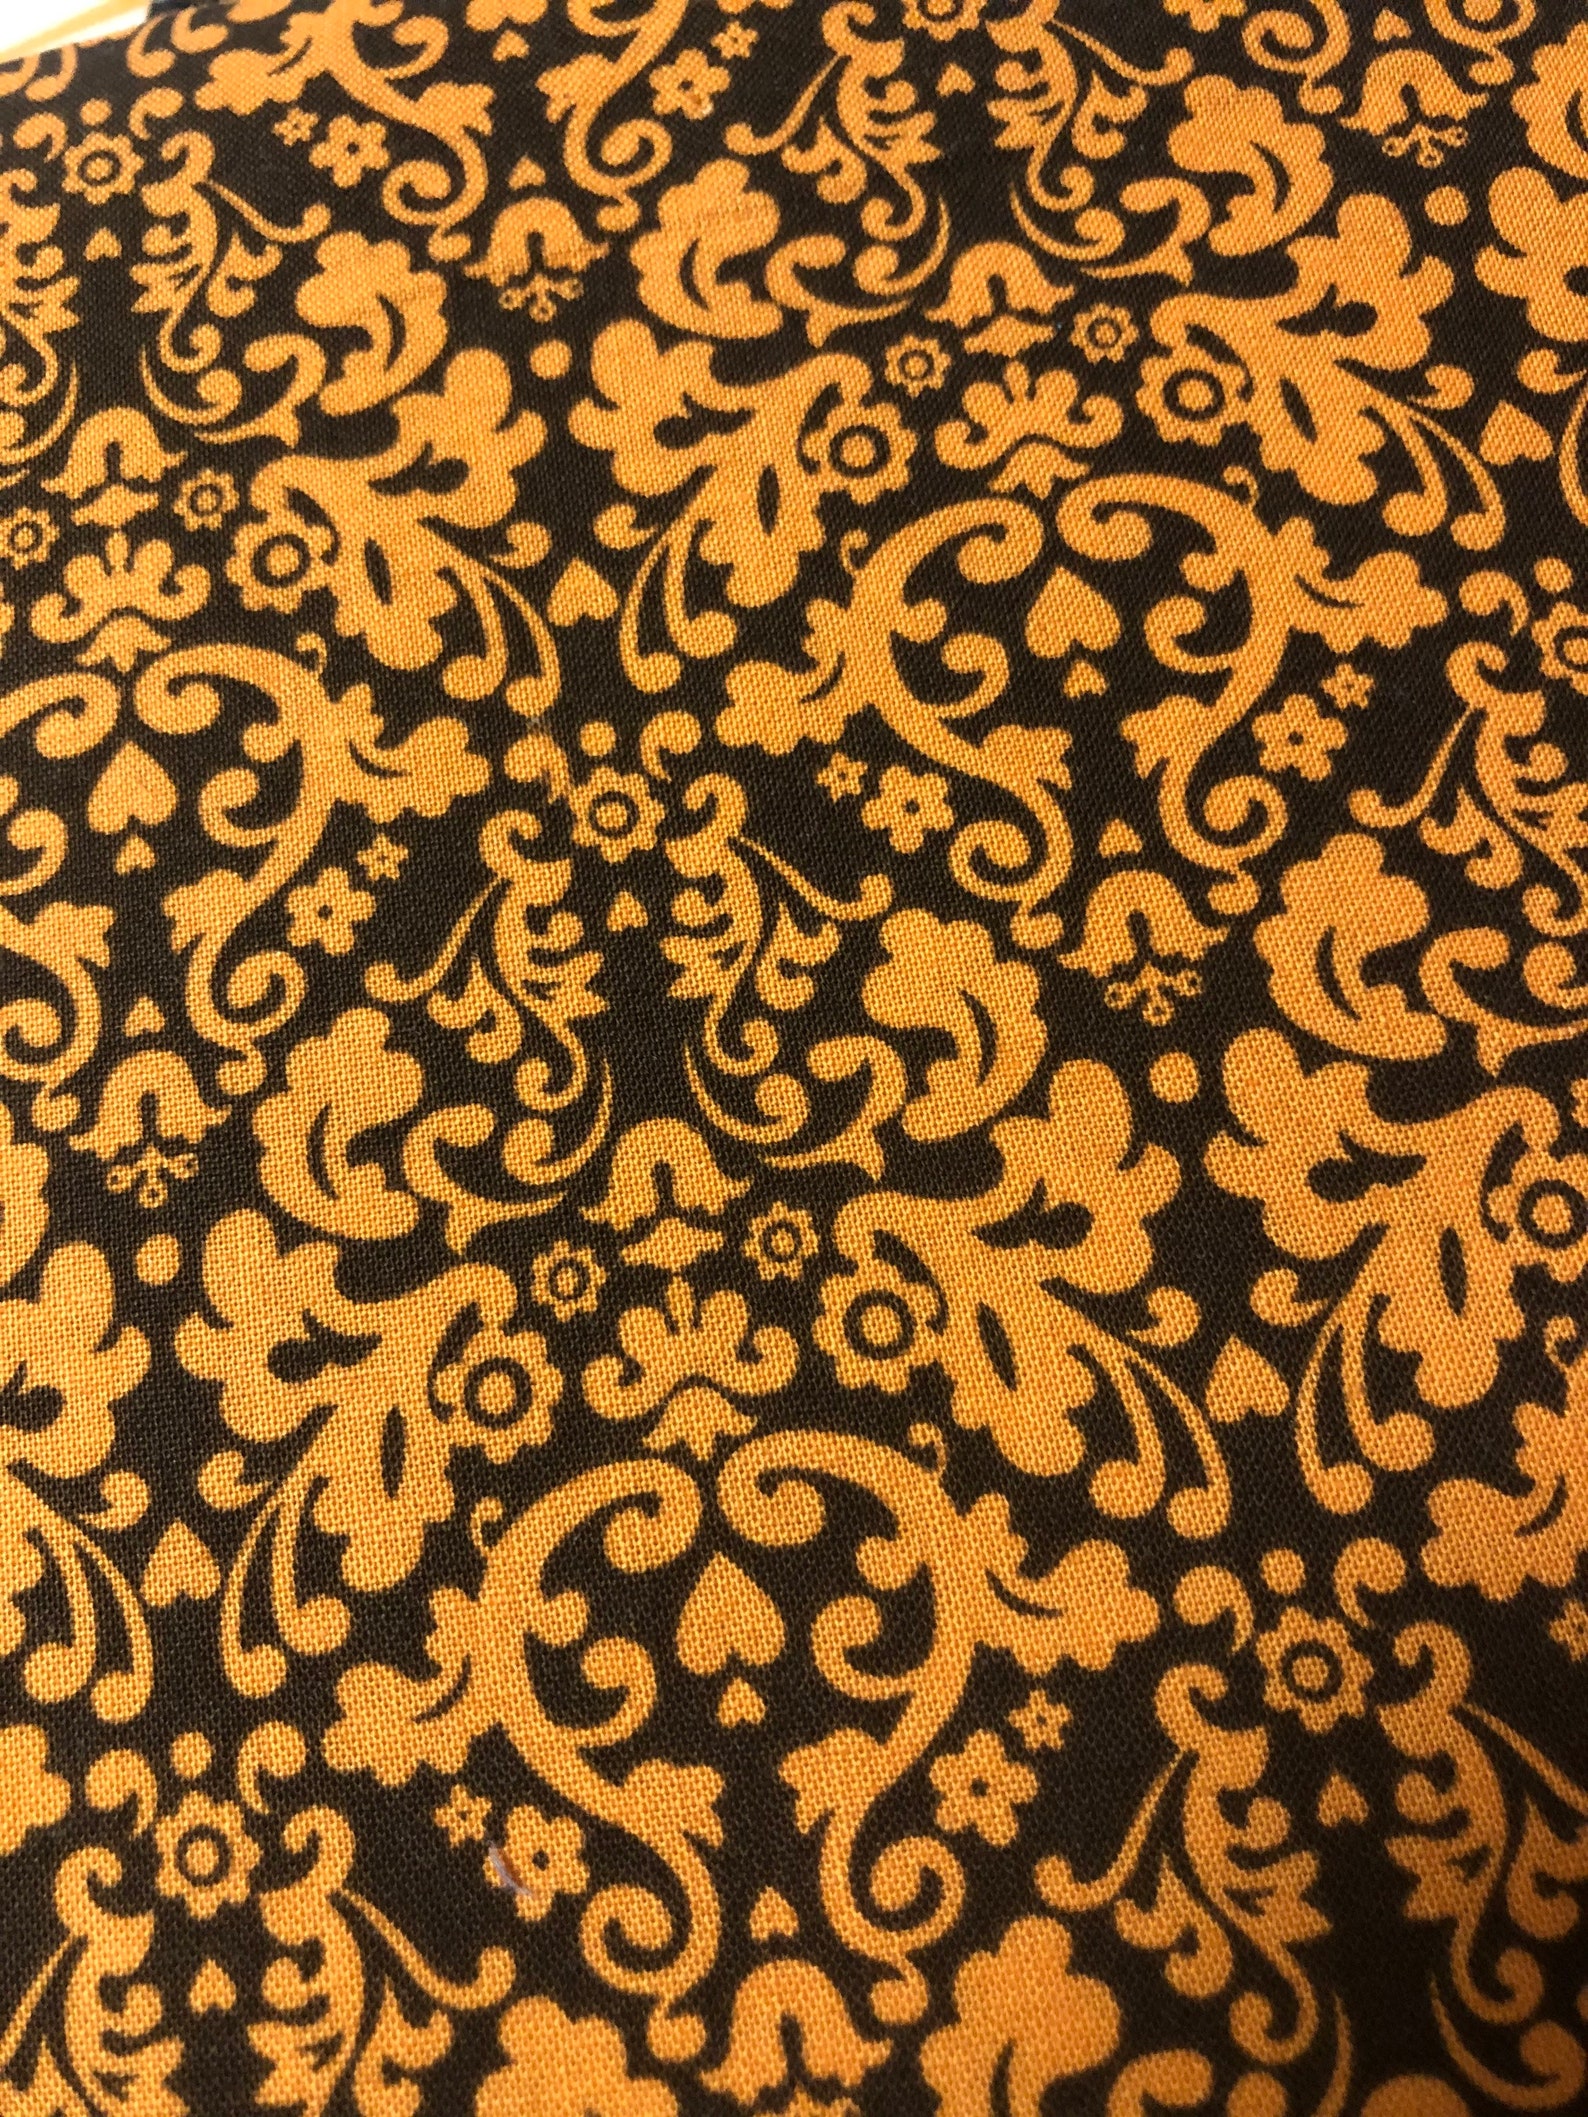 Orange and Brown Fabric by the Yard Fall Fabric Halloween | Etsy